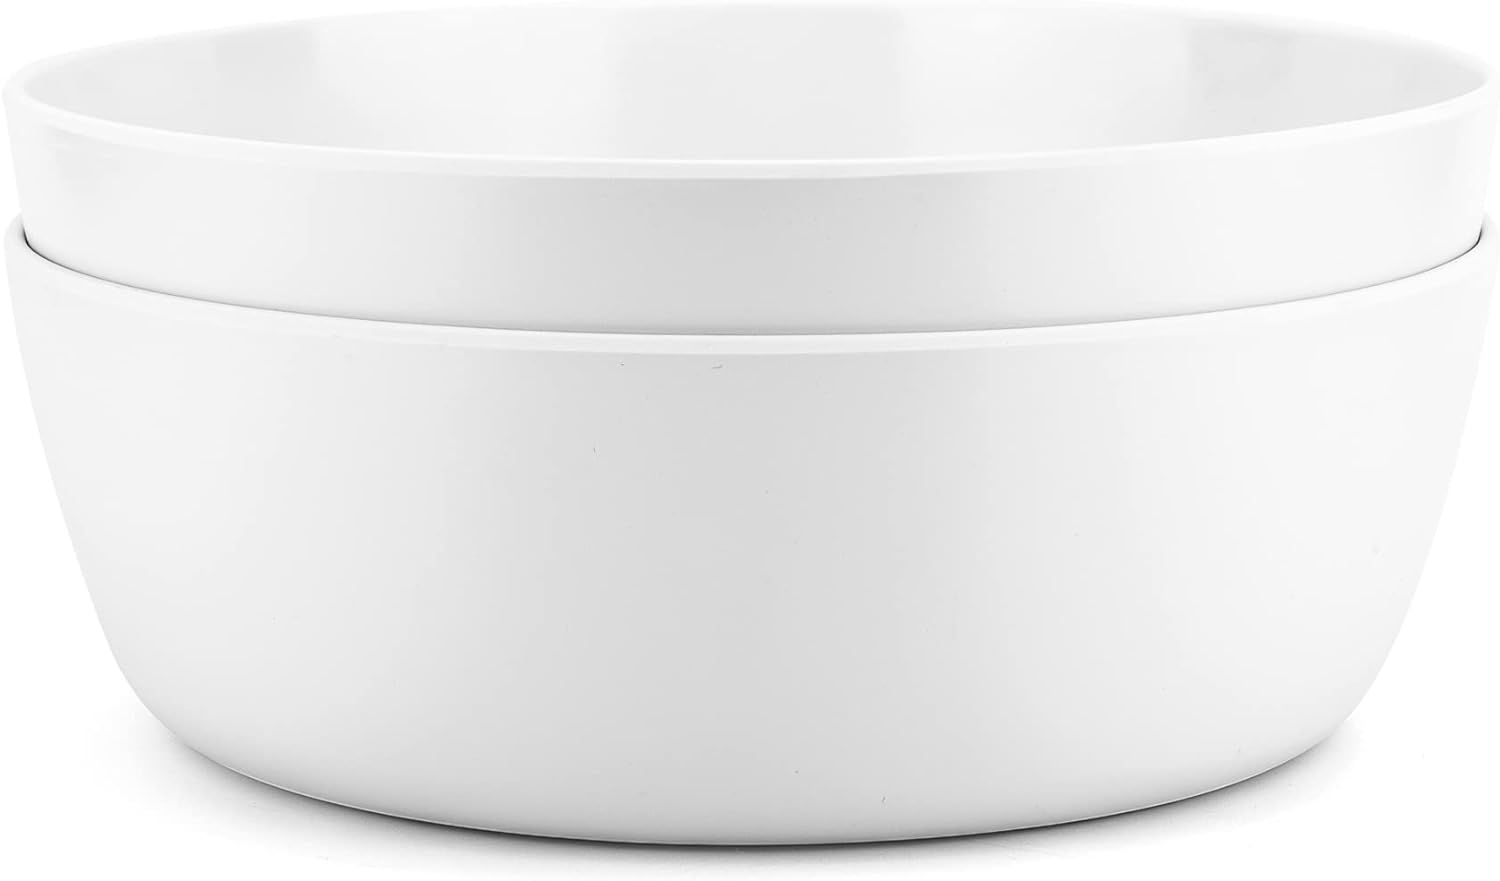 11-inch Melamine Mixing and Serving Bowls, set of 2 White | Amazon (US)